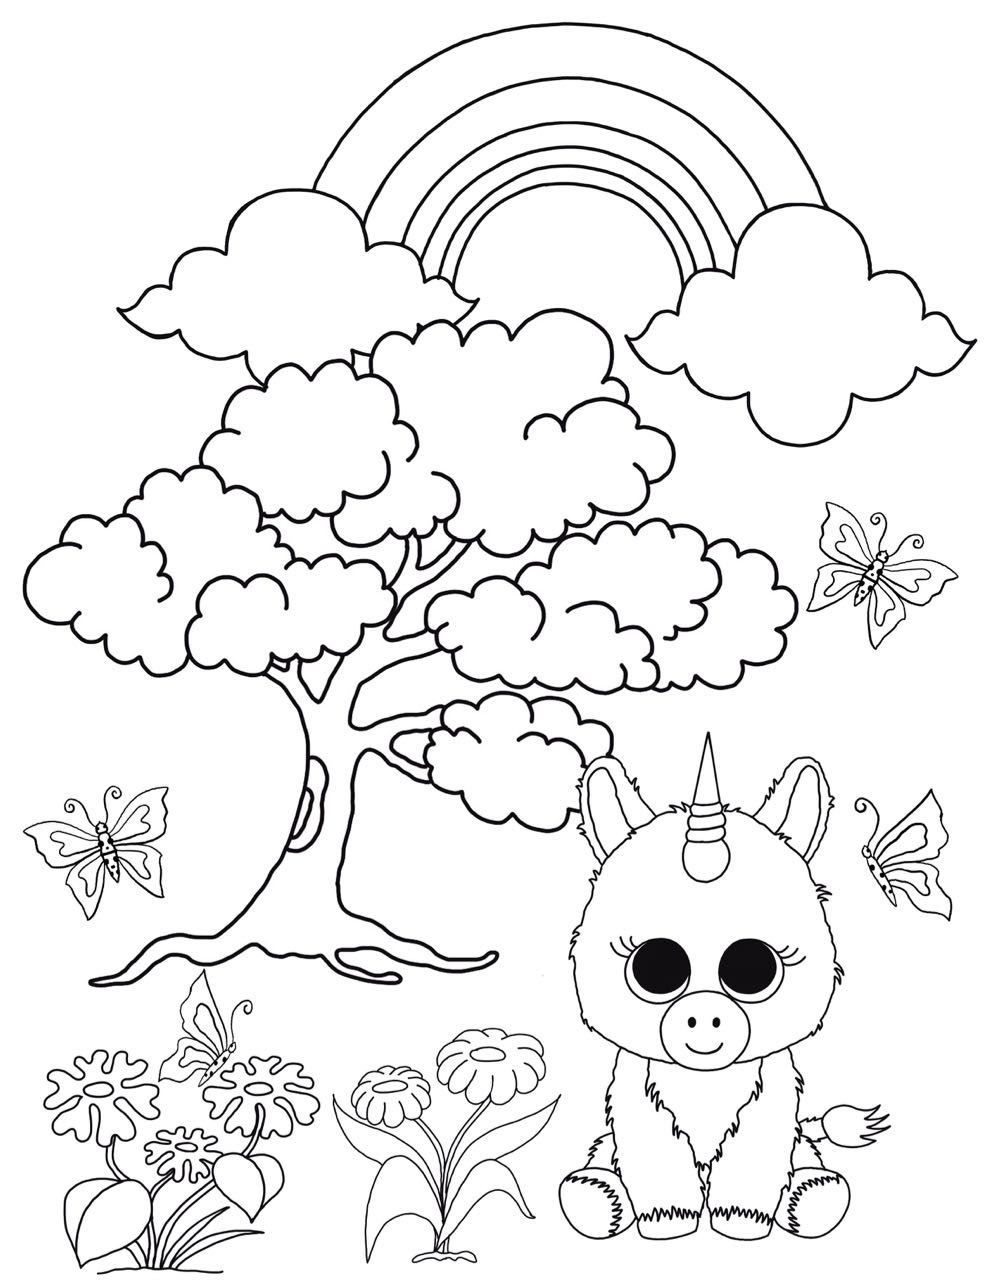 Free Beanie Boo Coloring Pages Download &amp;amp; Print: Cats, Dogs And Unicorns - Free Printable Beanie Boo Coloring Pages